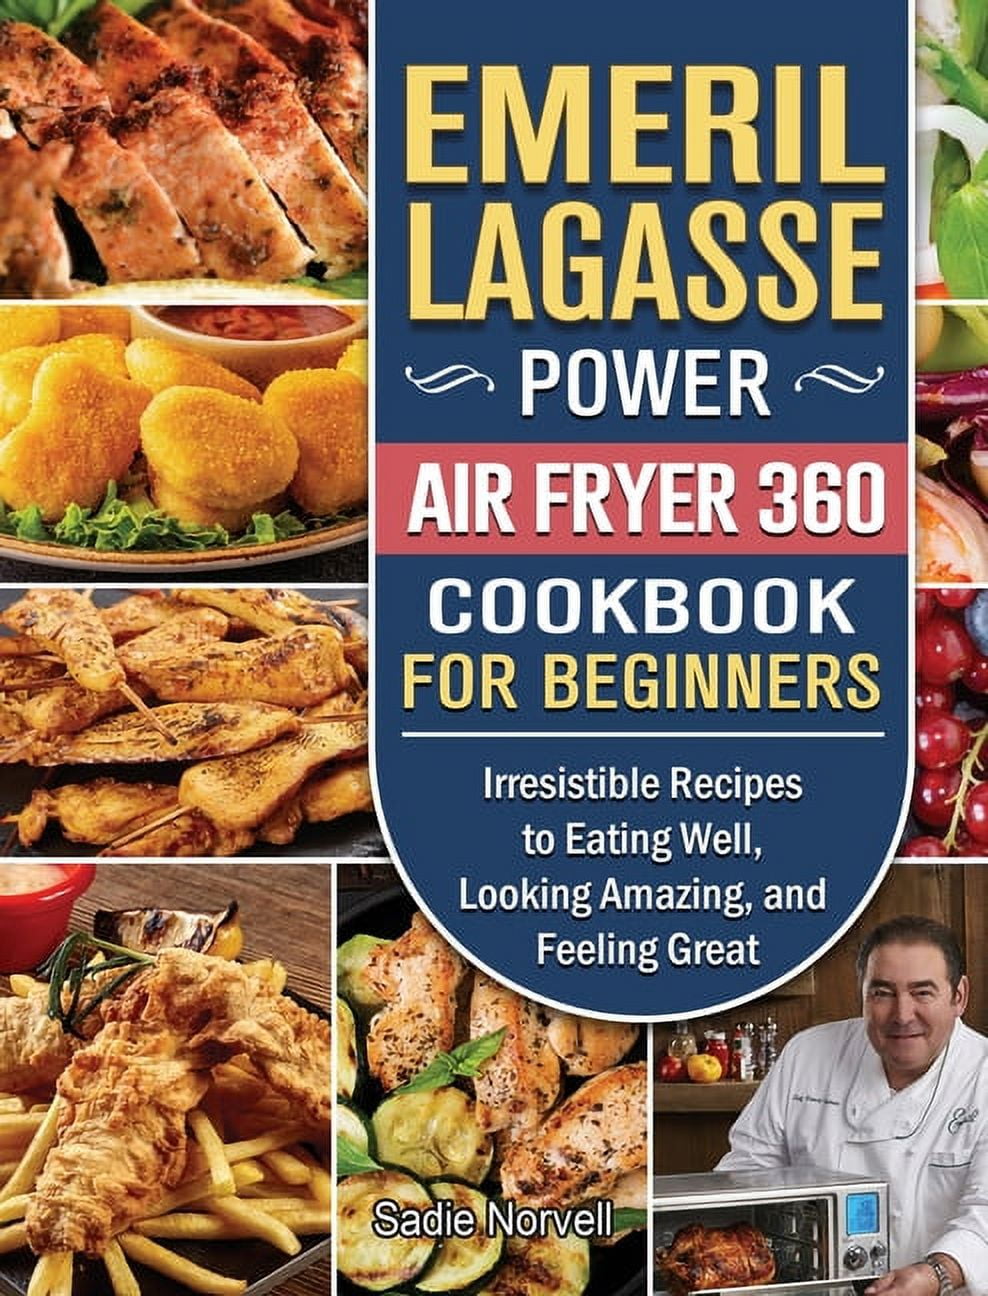 The Complete Emeril Lagasse French Door 360 Dual Zone Air Fryer Cookbook:  1800 Days Affordable, Quick & Easy Air Fryer Recipes for Beginners and  Advanced Users with 30-Day Meal Plan by Kelli